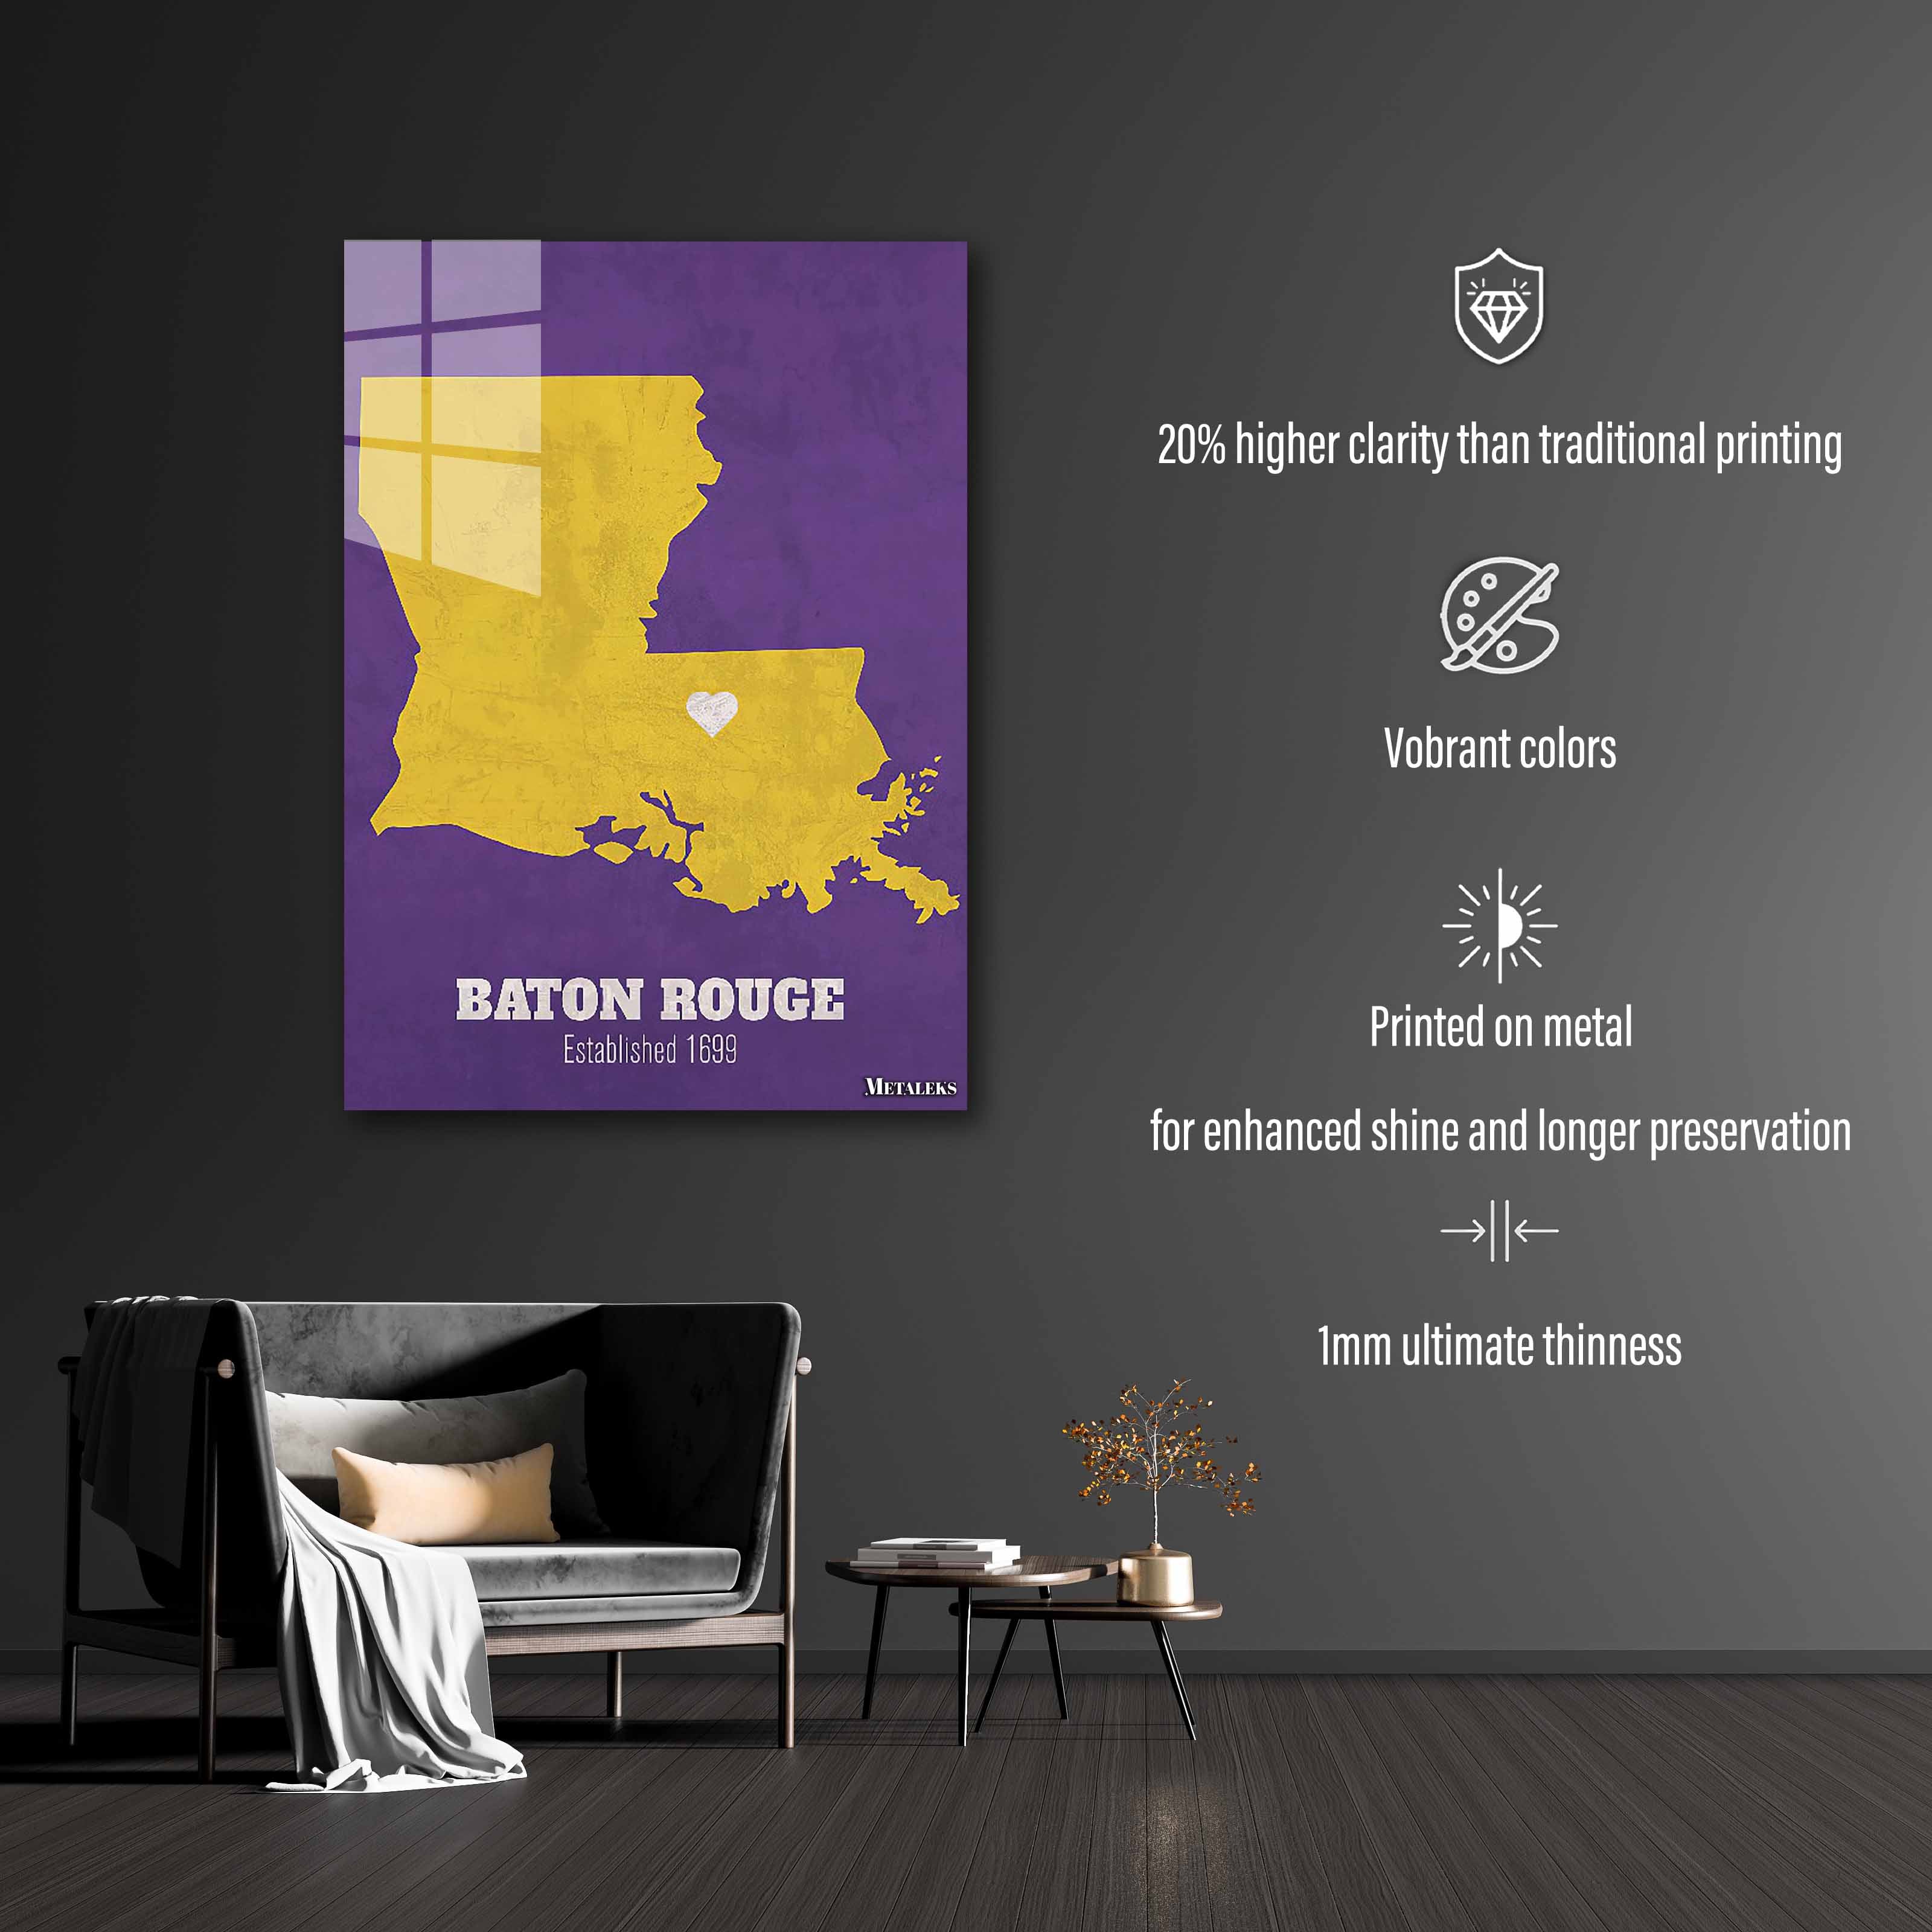 Baton Rouge-designed by @ Enel Lighting